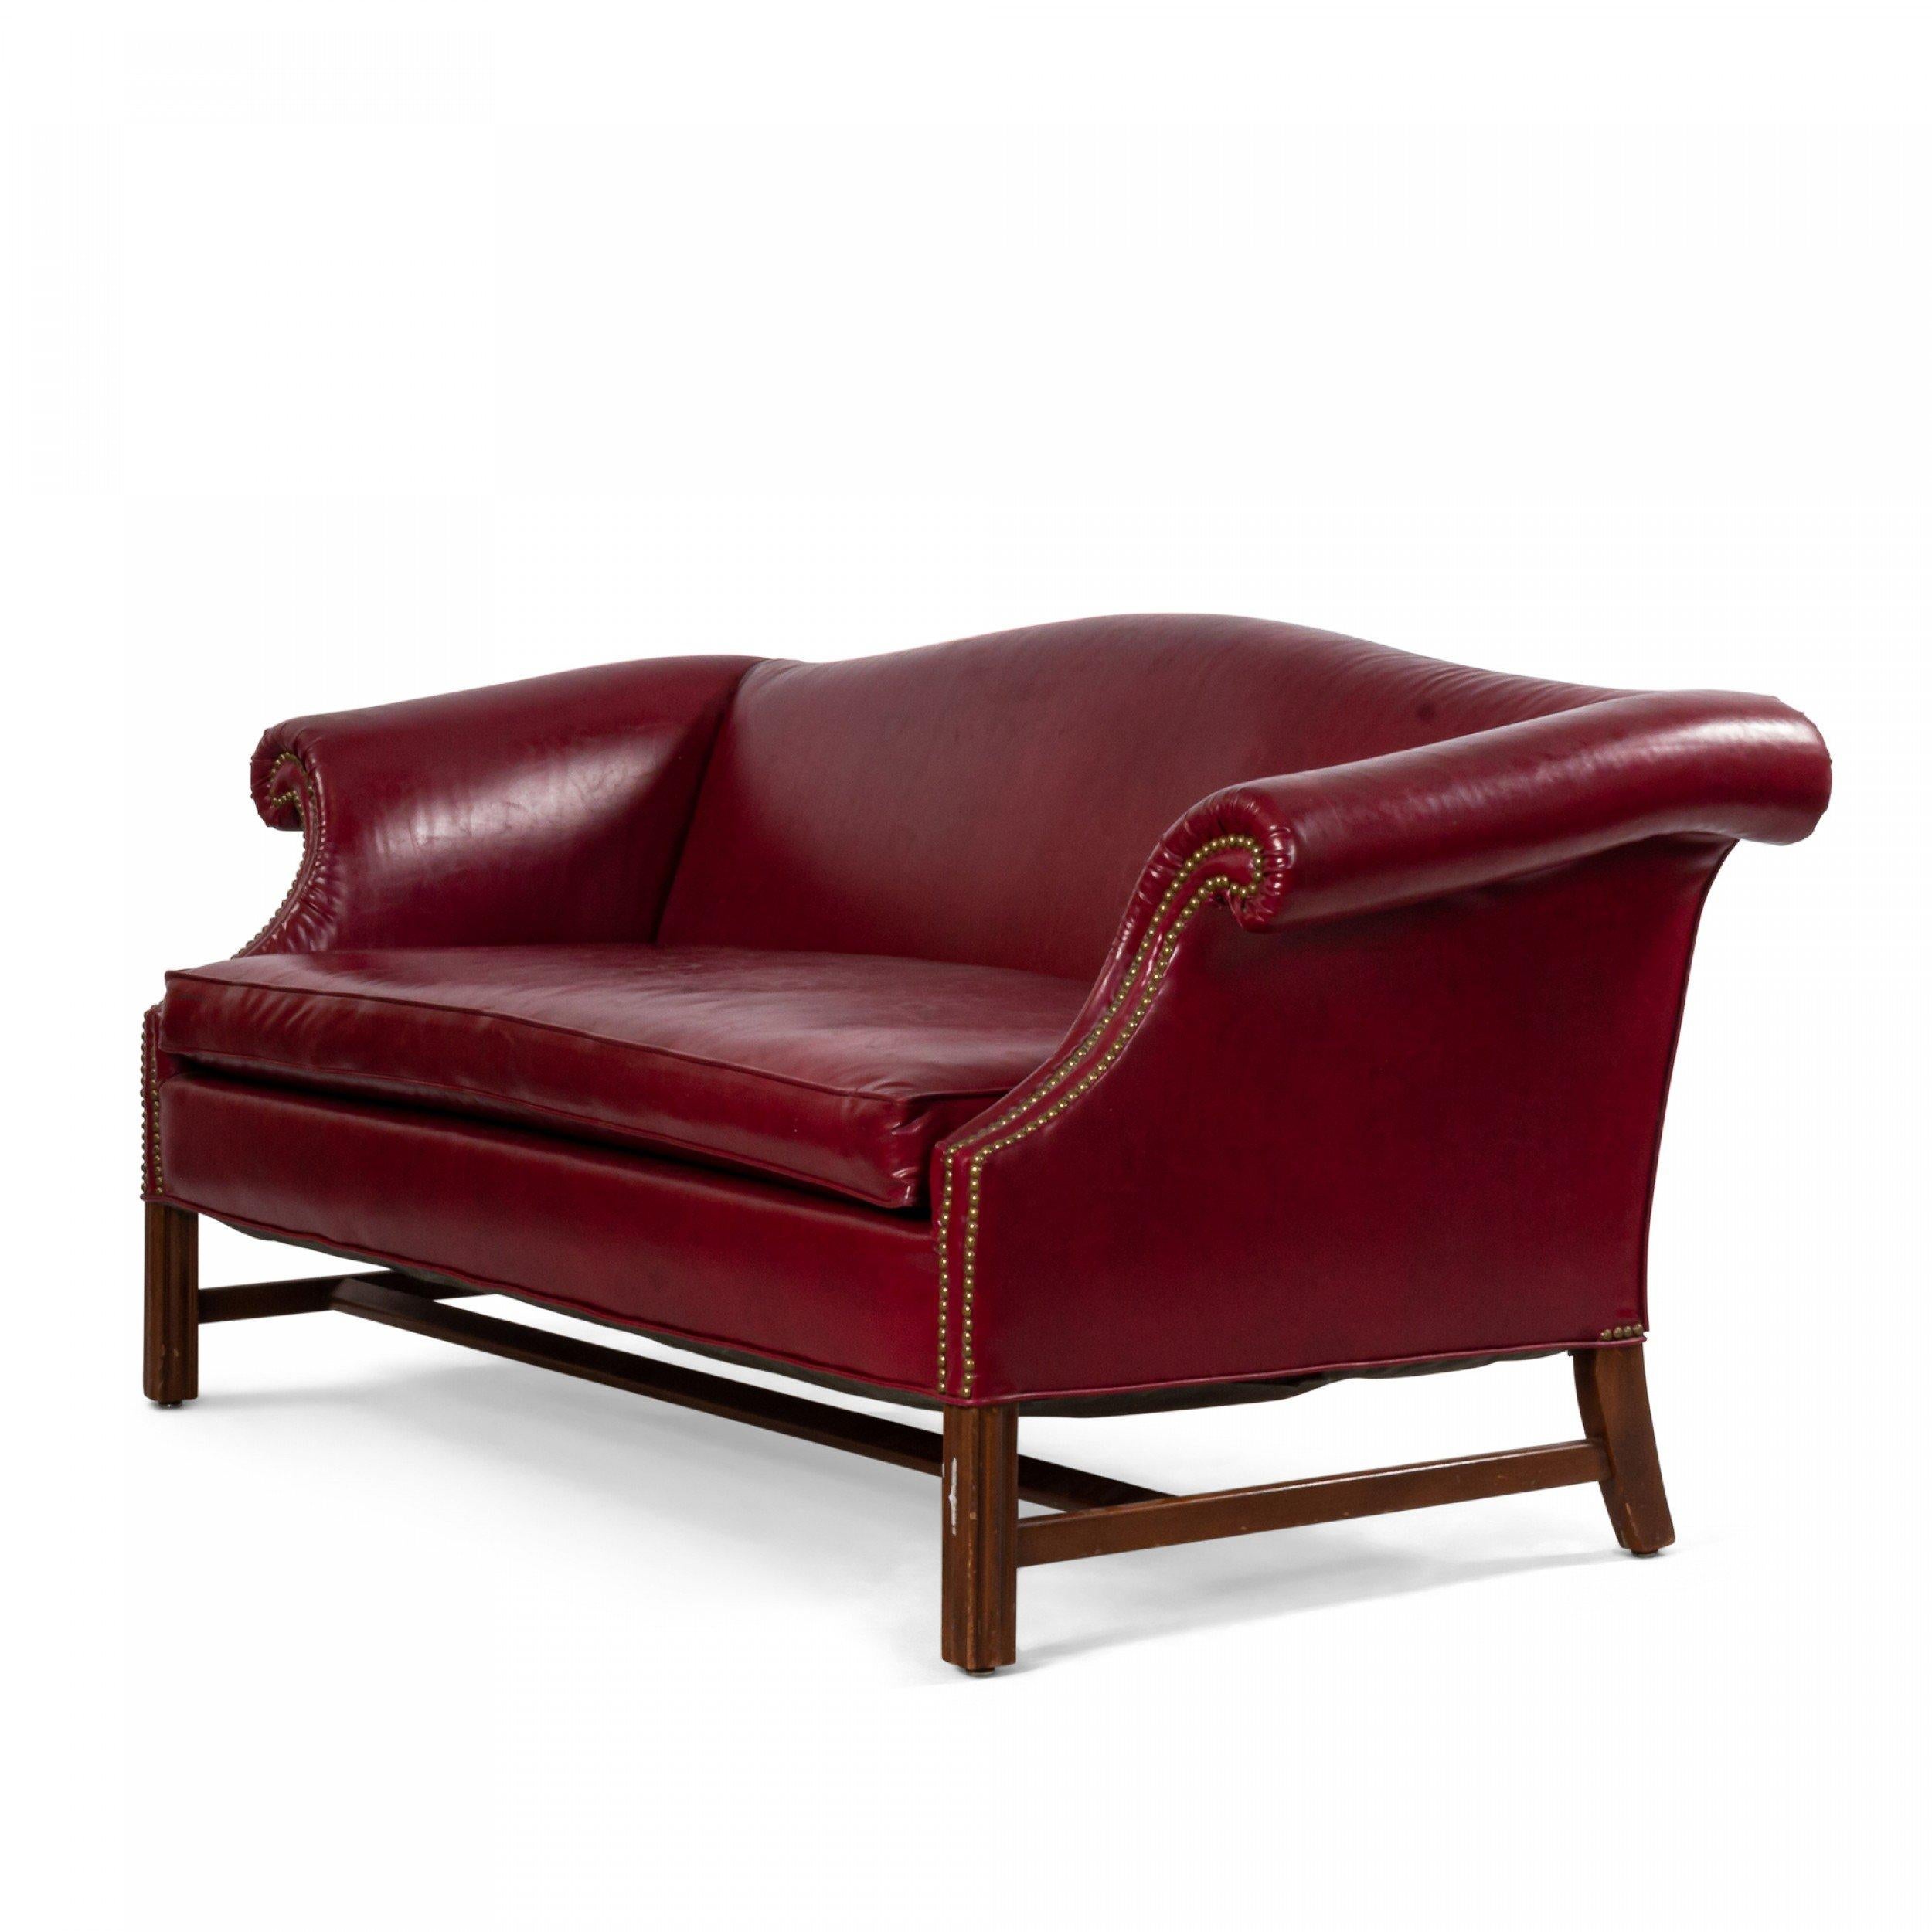 Vintage English Georgian style red leather camelback chesterfield sofa with out-scrolled arms with brass nail head trim & a red leather seat cushion supported on straight reeded legs connected by a center stretcher with a single seat cushion
 